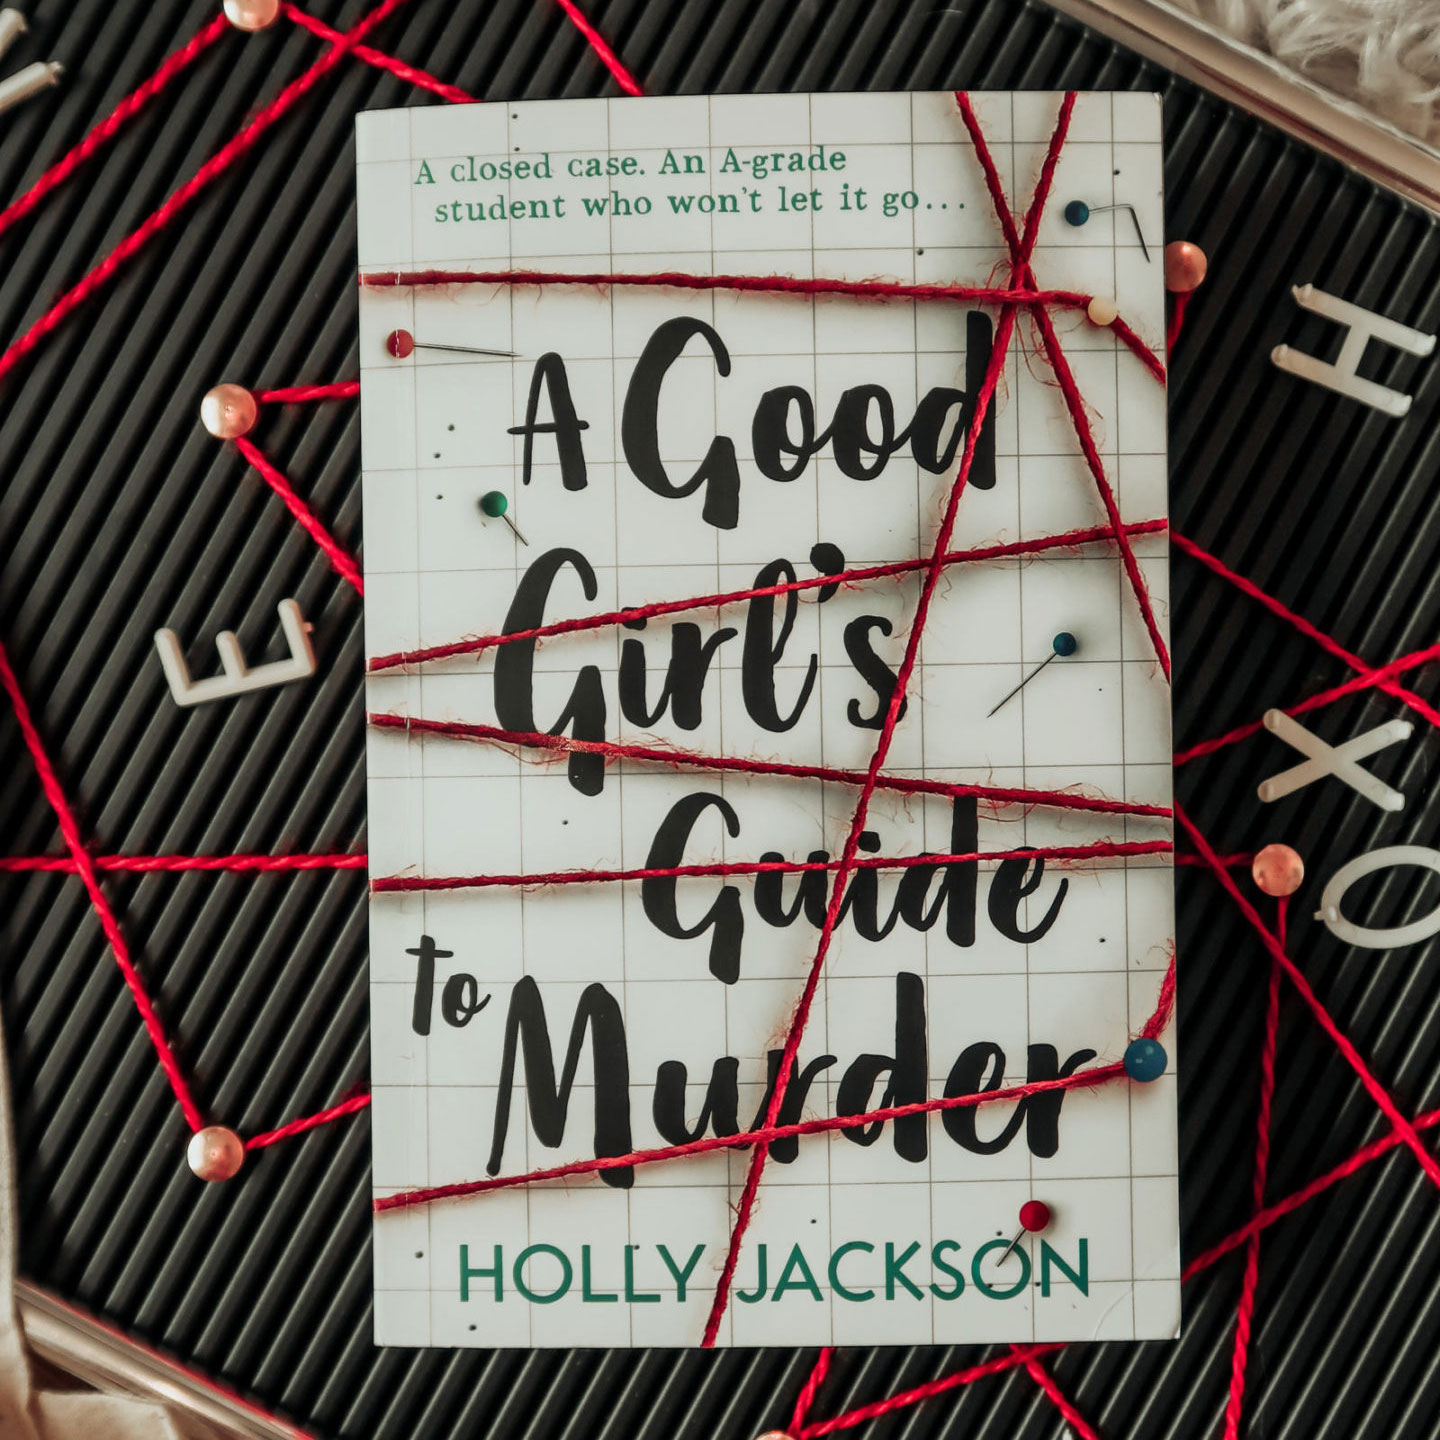  A Good Girl's Guide to Murder